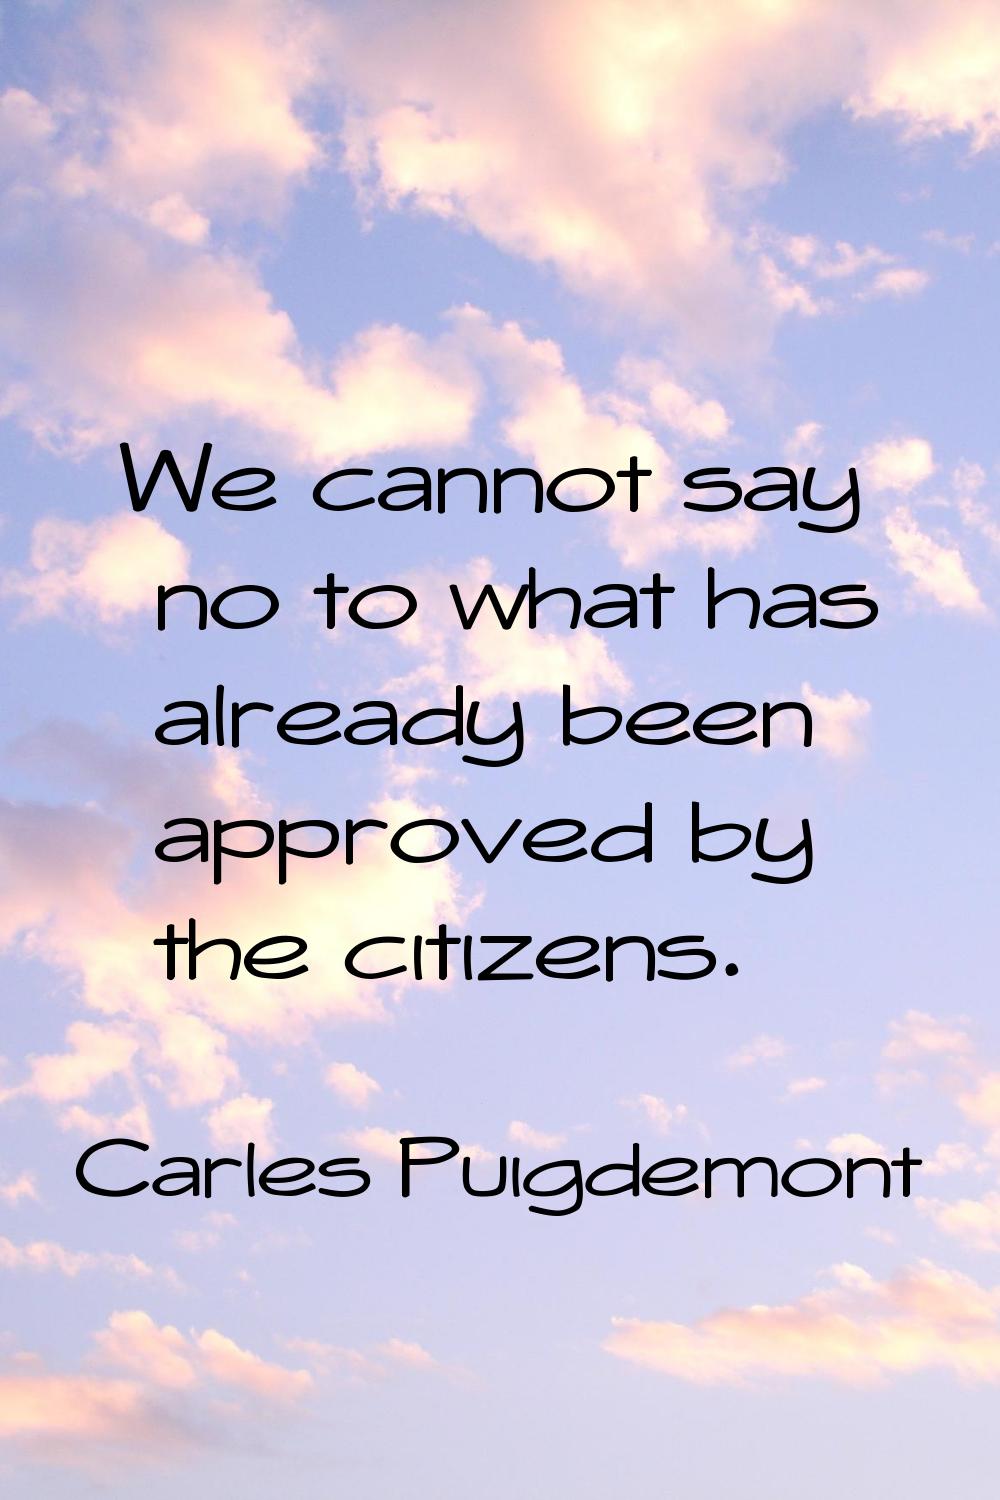 We cannot say no to what has already been approved by the citizens.